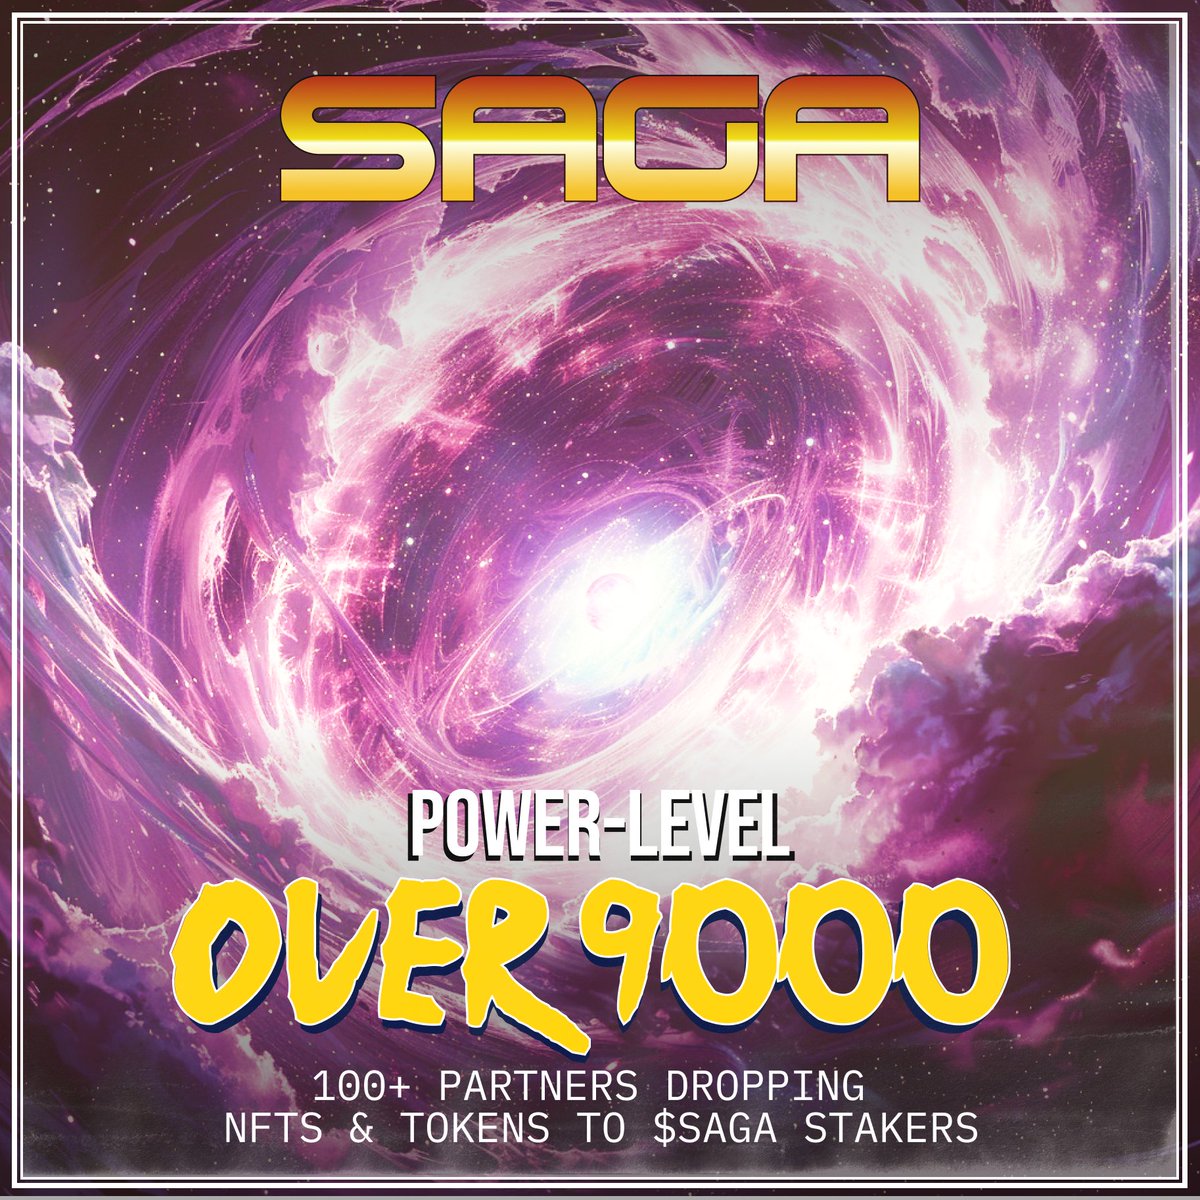 Introducing Power-Level Over 9000! Through this campaign $SAGA stakers will be leveling up all year with token & NFT drops from over 100+ confirmed projects across web3 such as: @playSHRAPNEL @TheSandboxGame @WilderWorld @YieldGuild @EnginesOfFury @XPLA_Official @Blade_rite